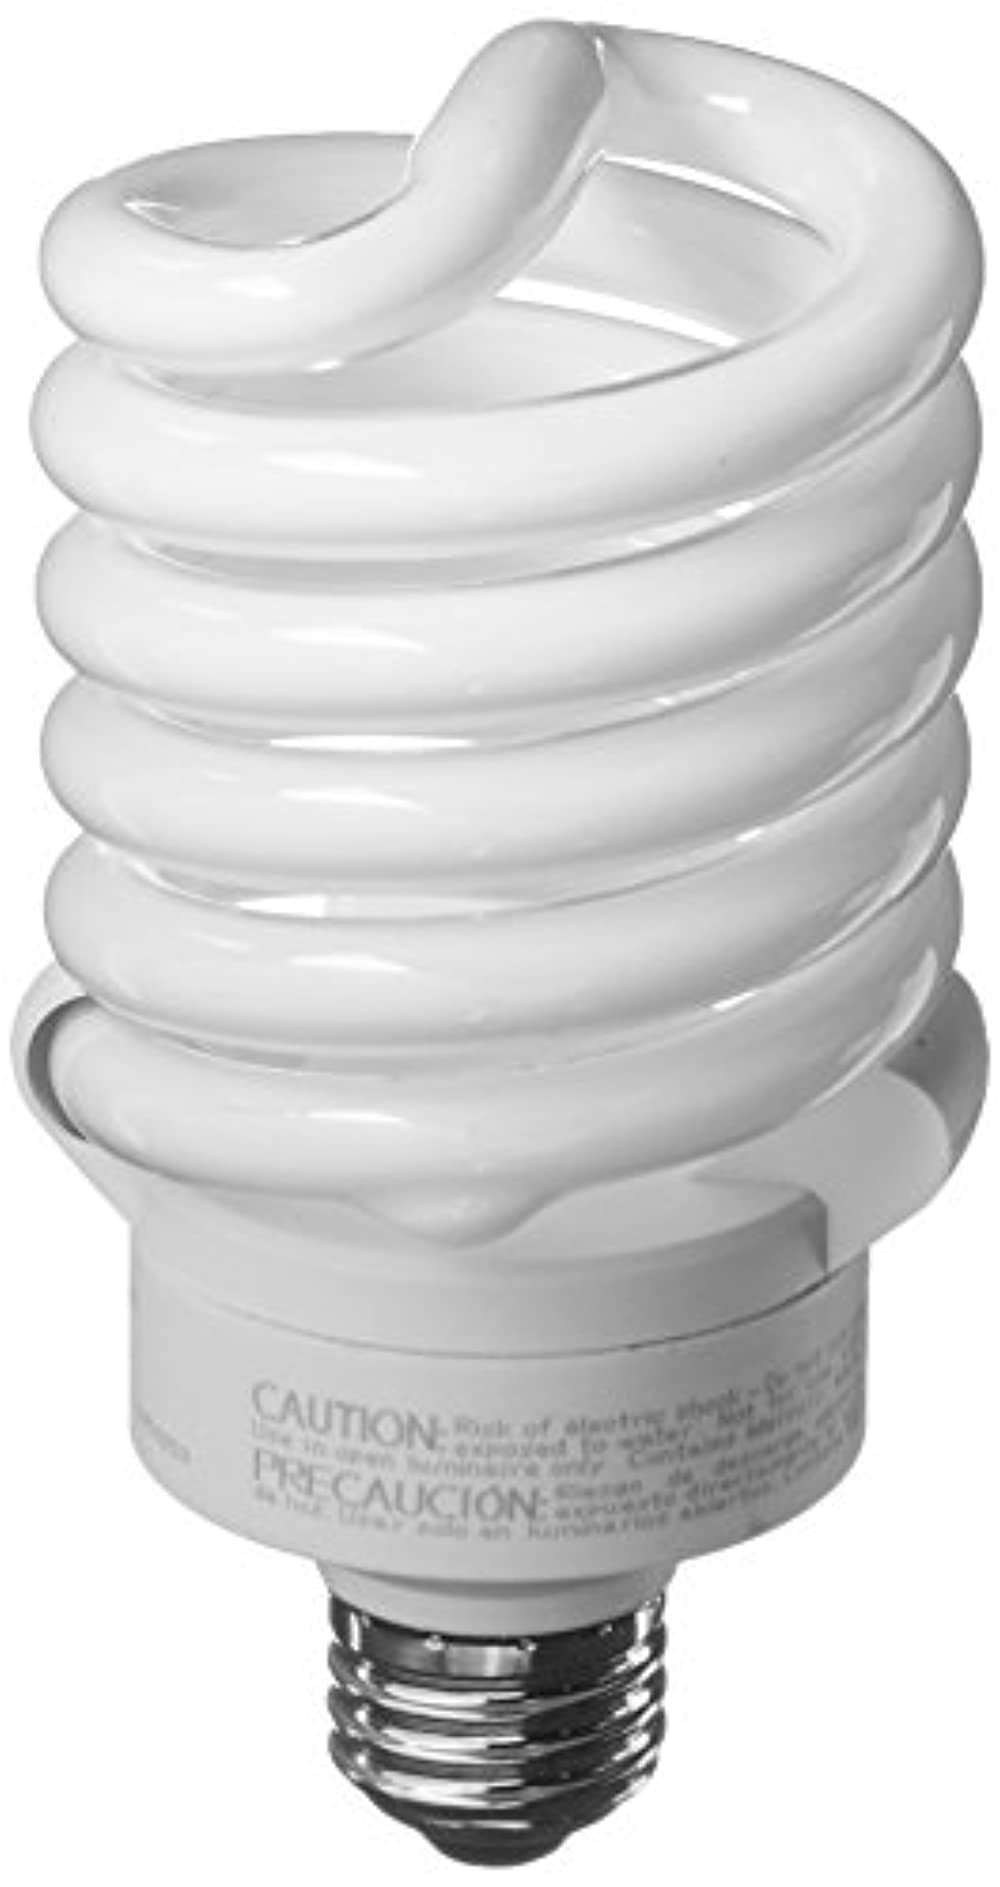 TCP CFL Spring Lamp 60W Equivalent Blue Colored Spiral Light Bulb 